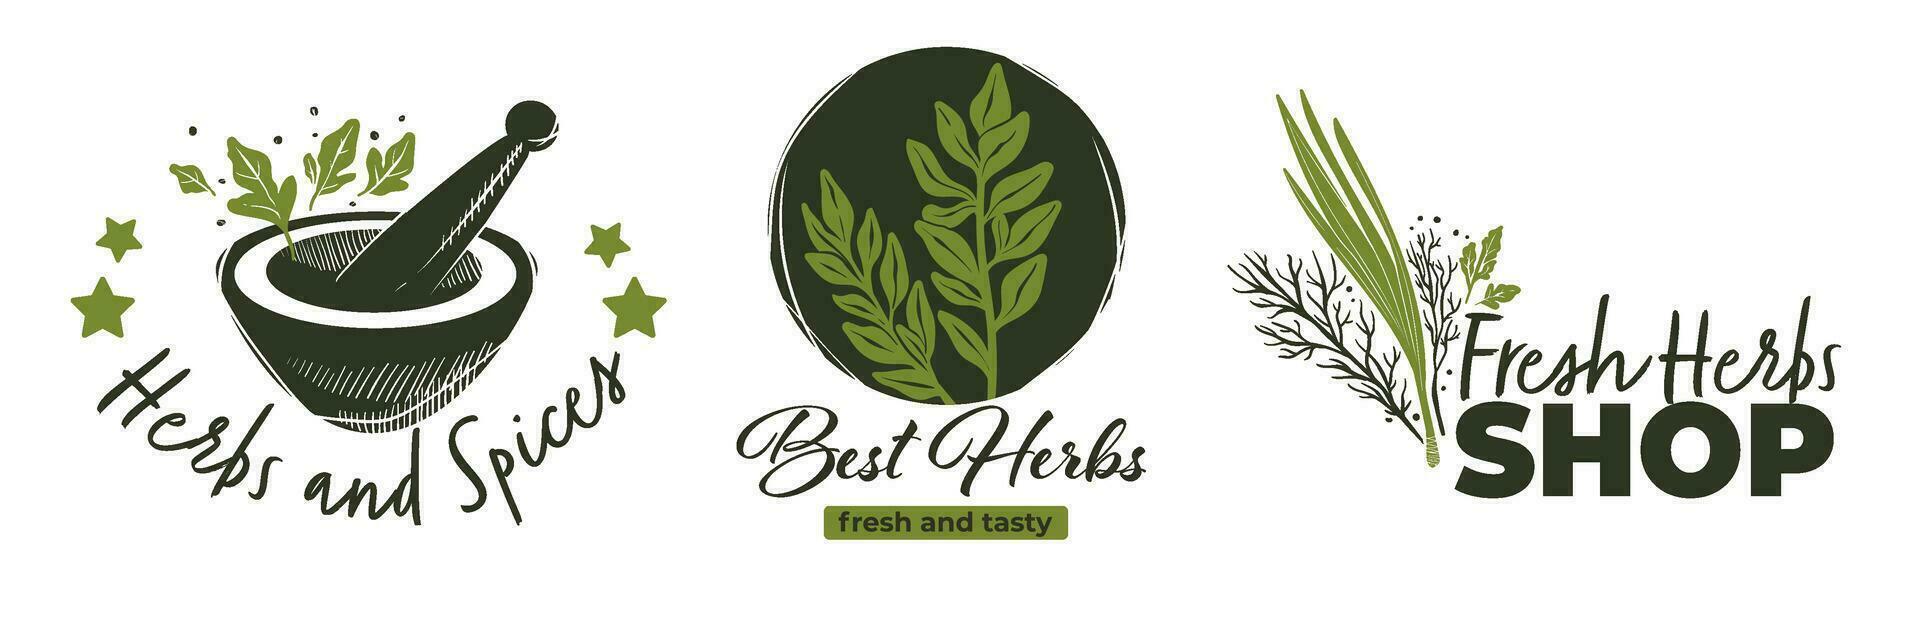 Herbs and spices fresh shop or markets labels vector